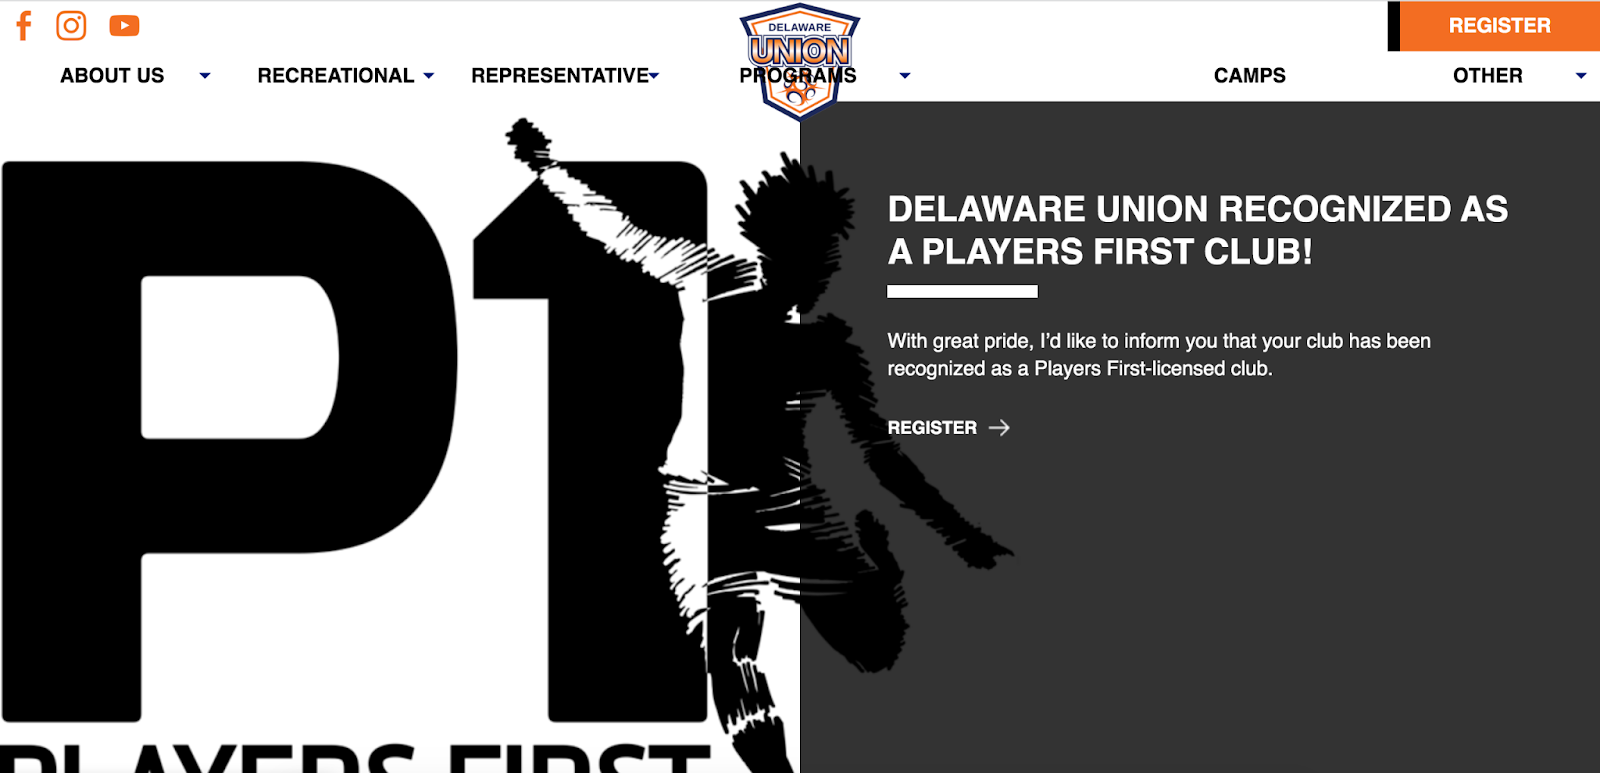 One of the best Delaware Soccer Clubs